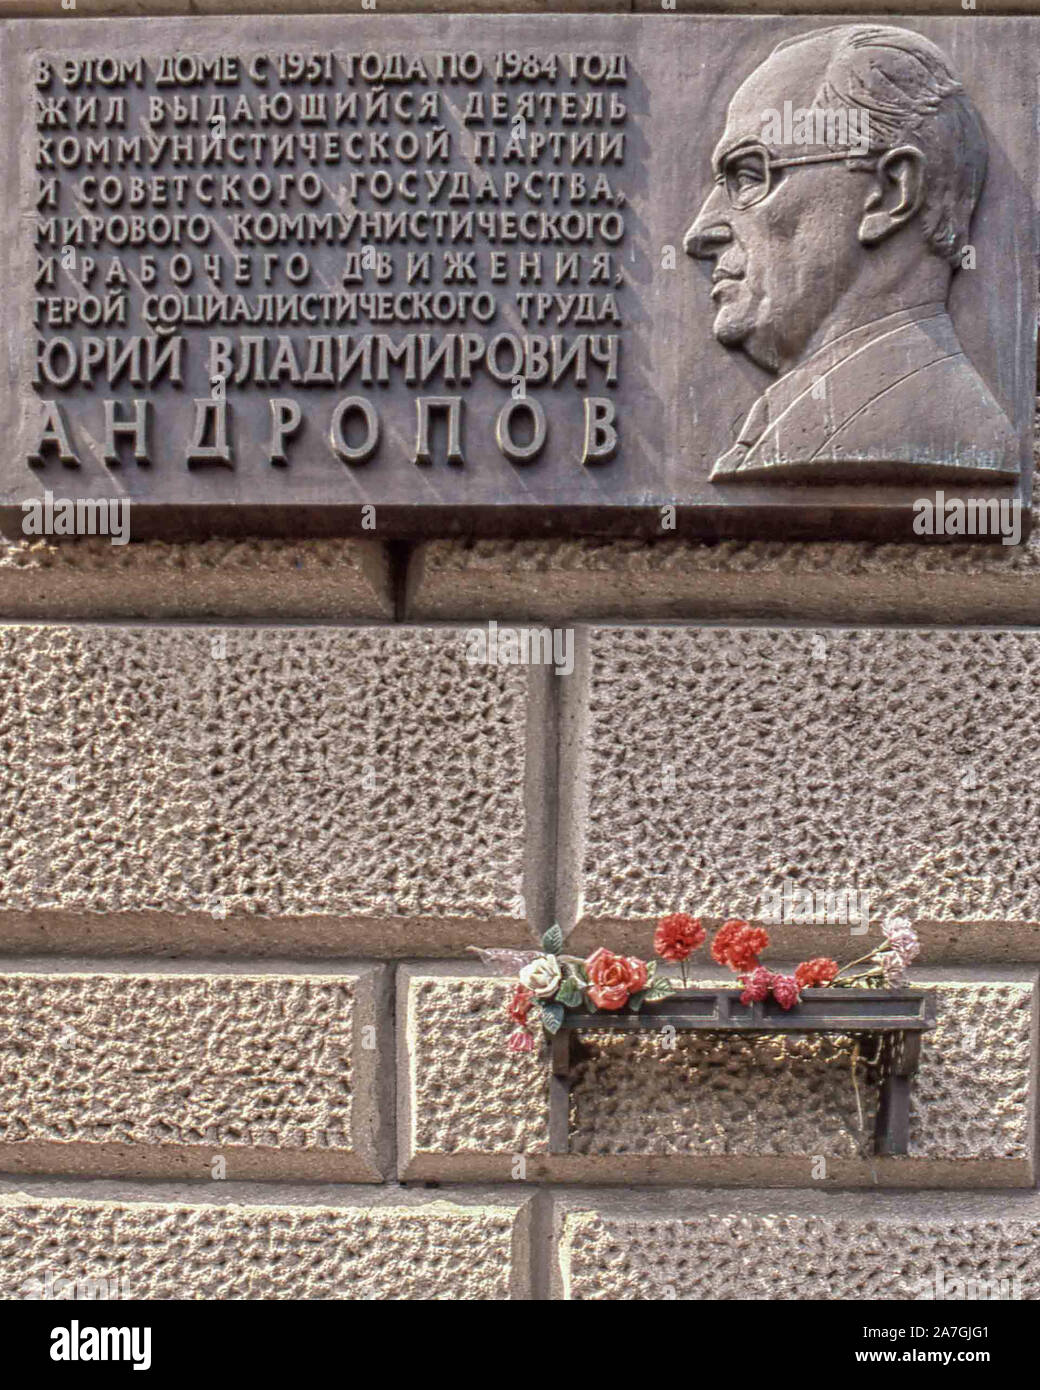 February 1, 1989, Moscow, Russia: A commemorative plaque and a shelf of flowers, on the wall of a stately Moscow apartment building at 26 Kutuzovsky Prospect, (where he and other Soviet leaders lived) honors Yuri V. Andropov. A former head of the KGB, he was General Secretary of the Communist Party of the Soviet Union from November 1982 until his death in February 1984. (Credit Image: © Arnold Drapkin/ZUMA Wire) Stock Photo